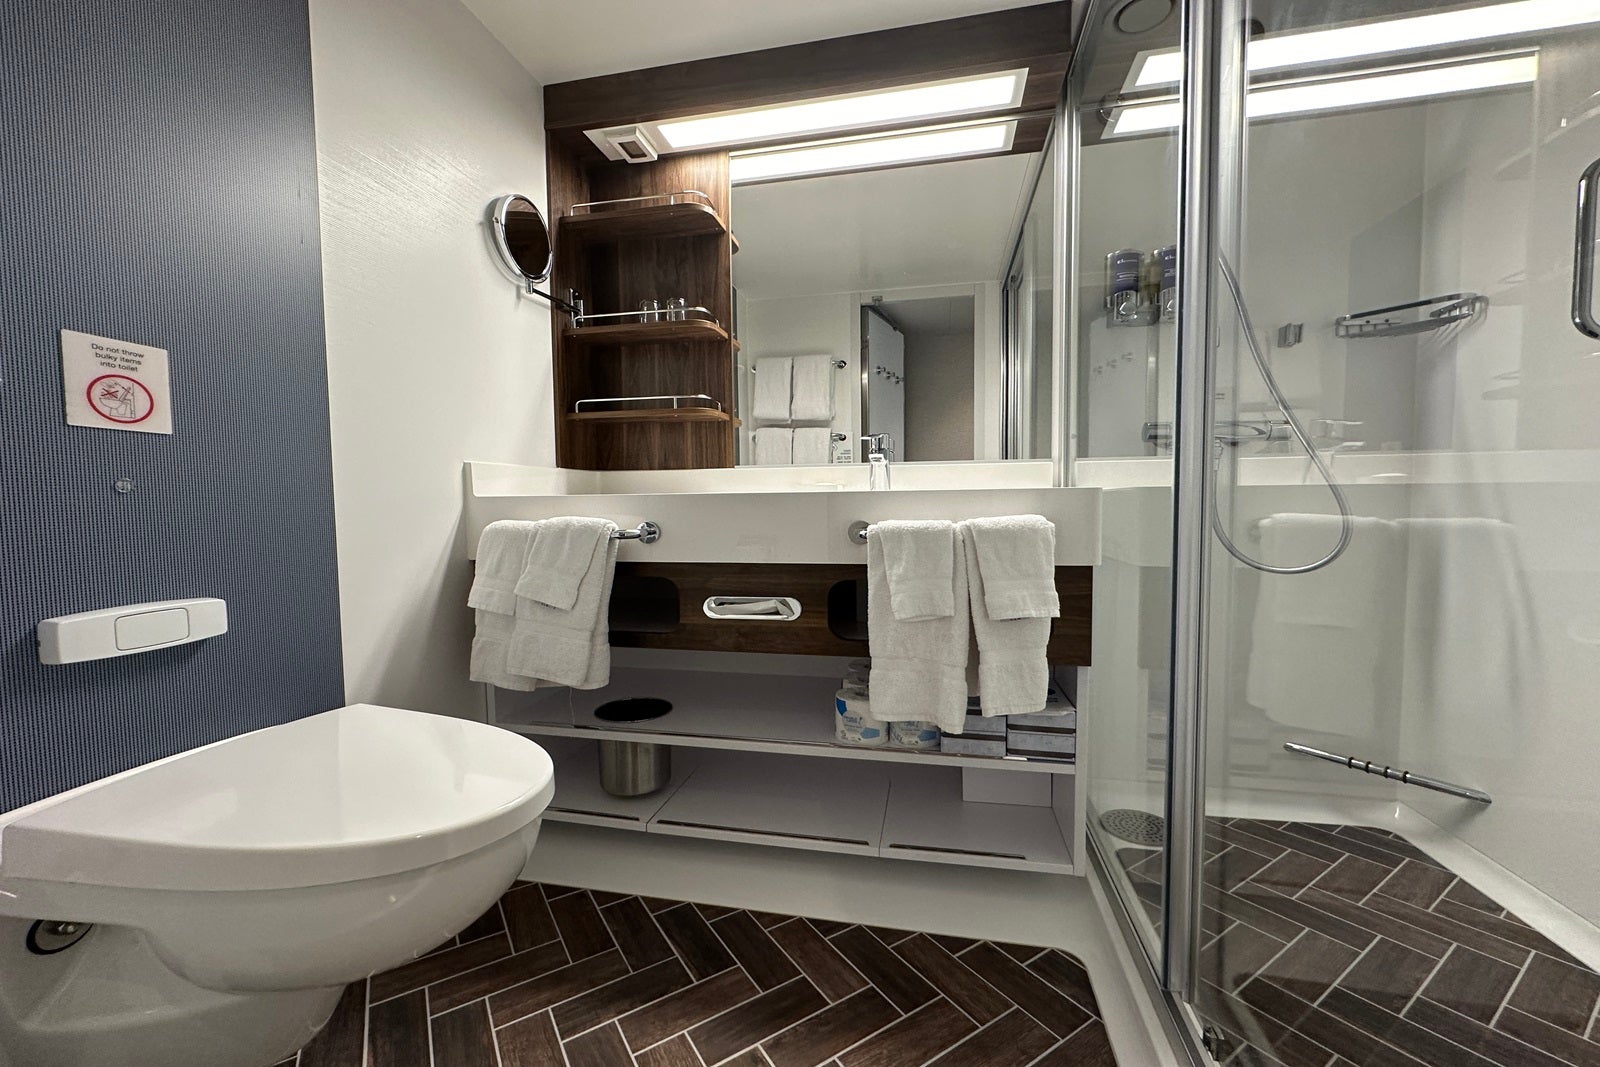 A cruise ship bathroom with a toilet, dual sink, mirror, shower and towels